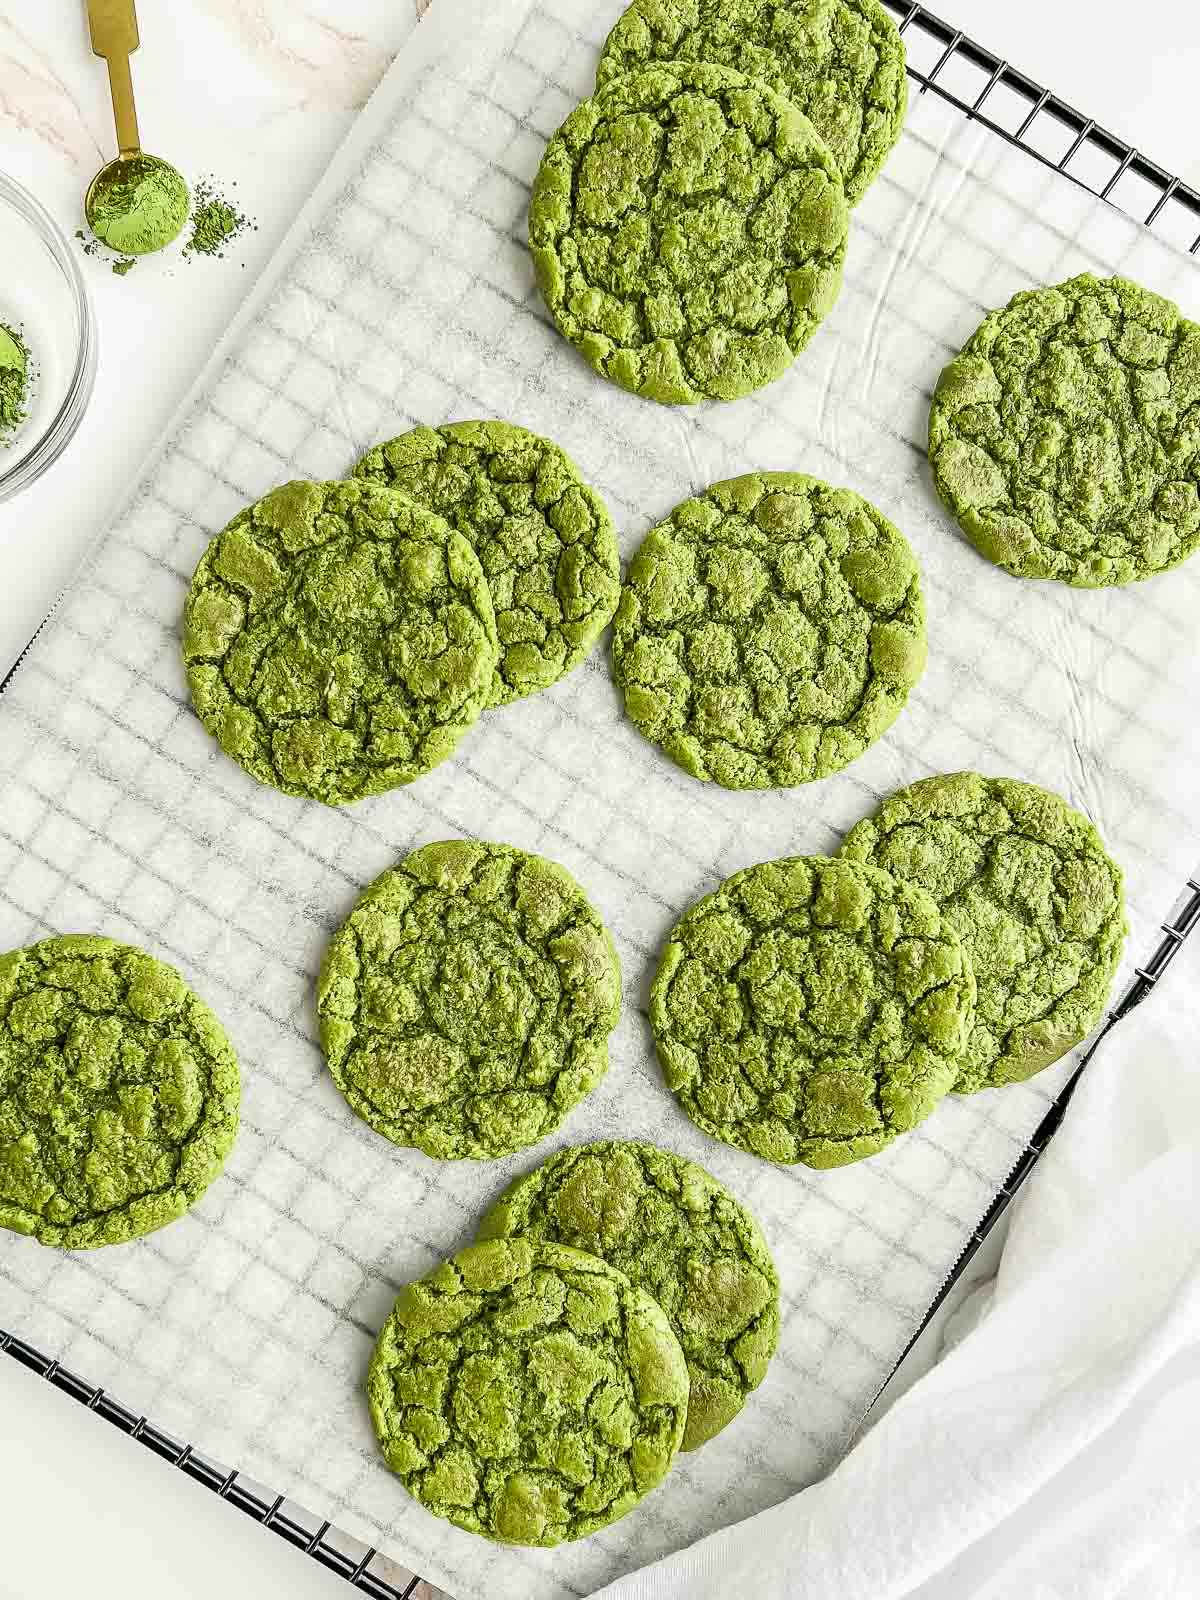 Cooling tray of matcha cookies with a teaspoon of matcha powder and tea towel.